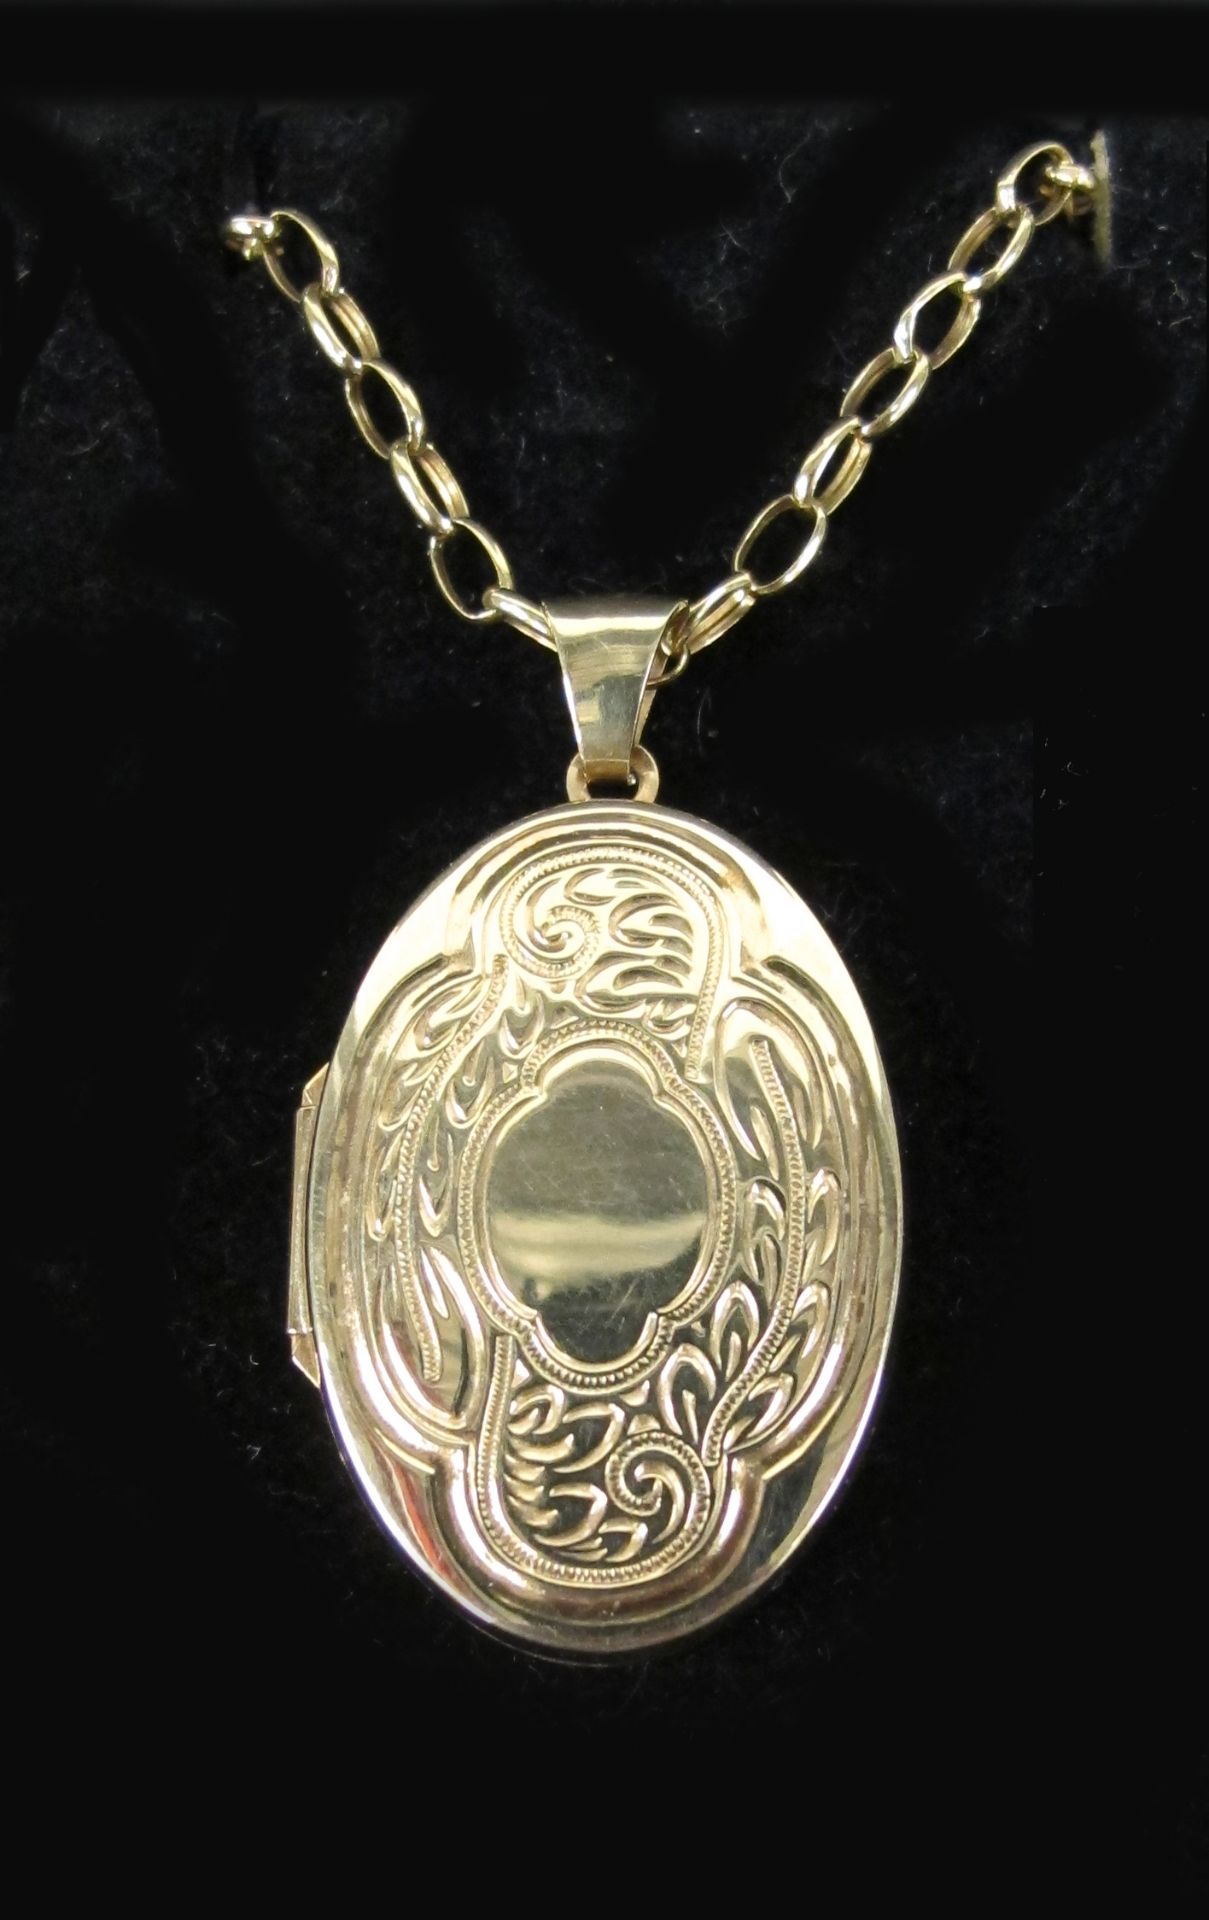 9ct gold locket on 9ct gold chain (approx. 5g) (est £80-£120)